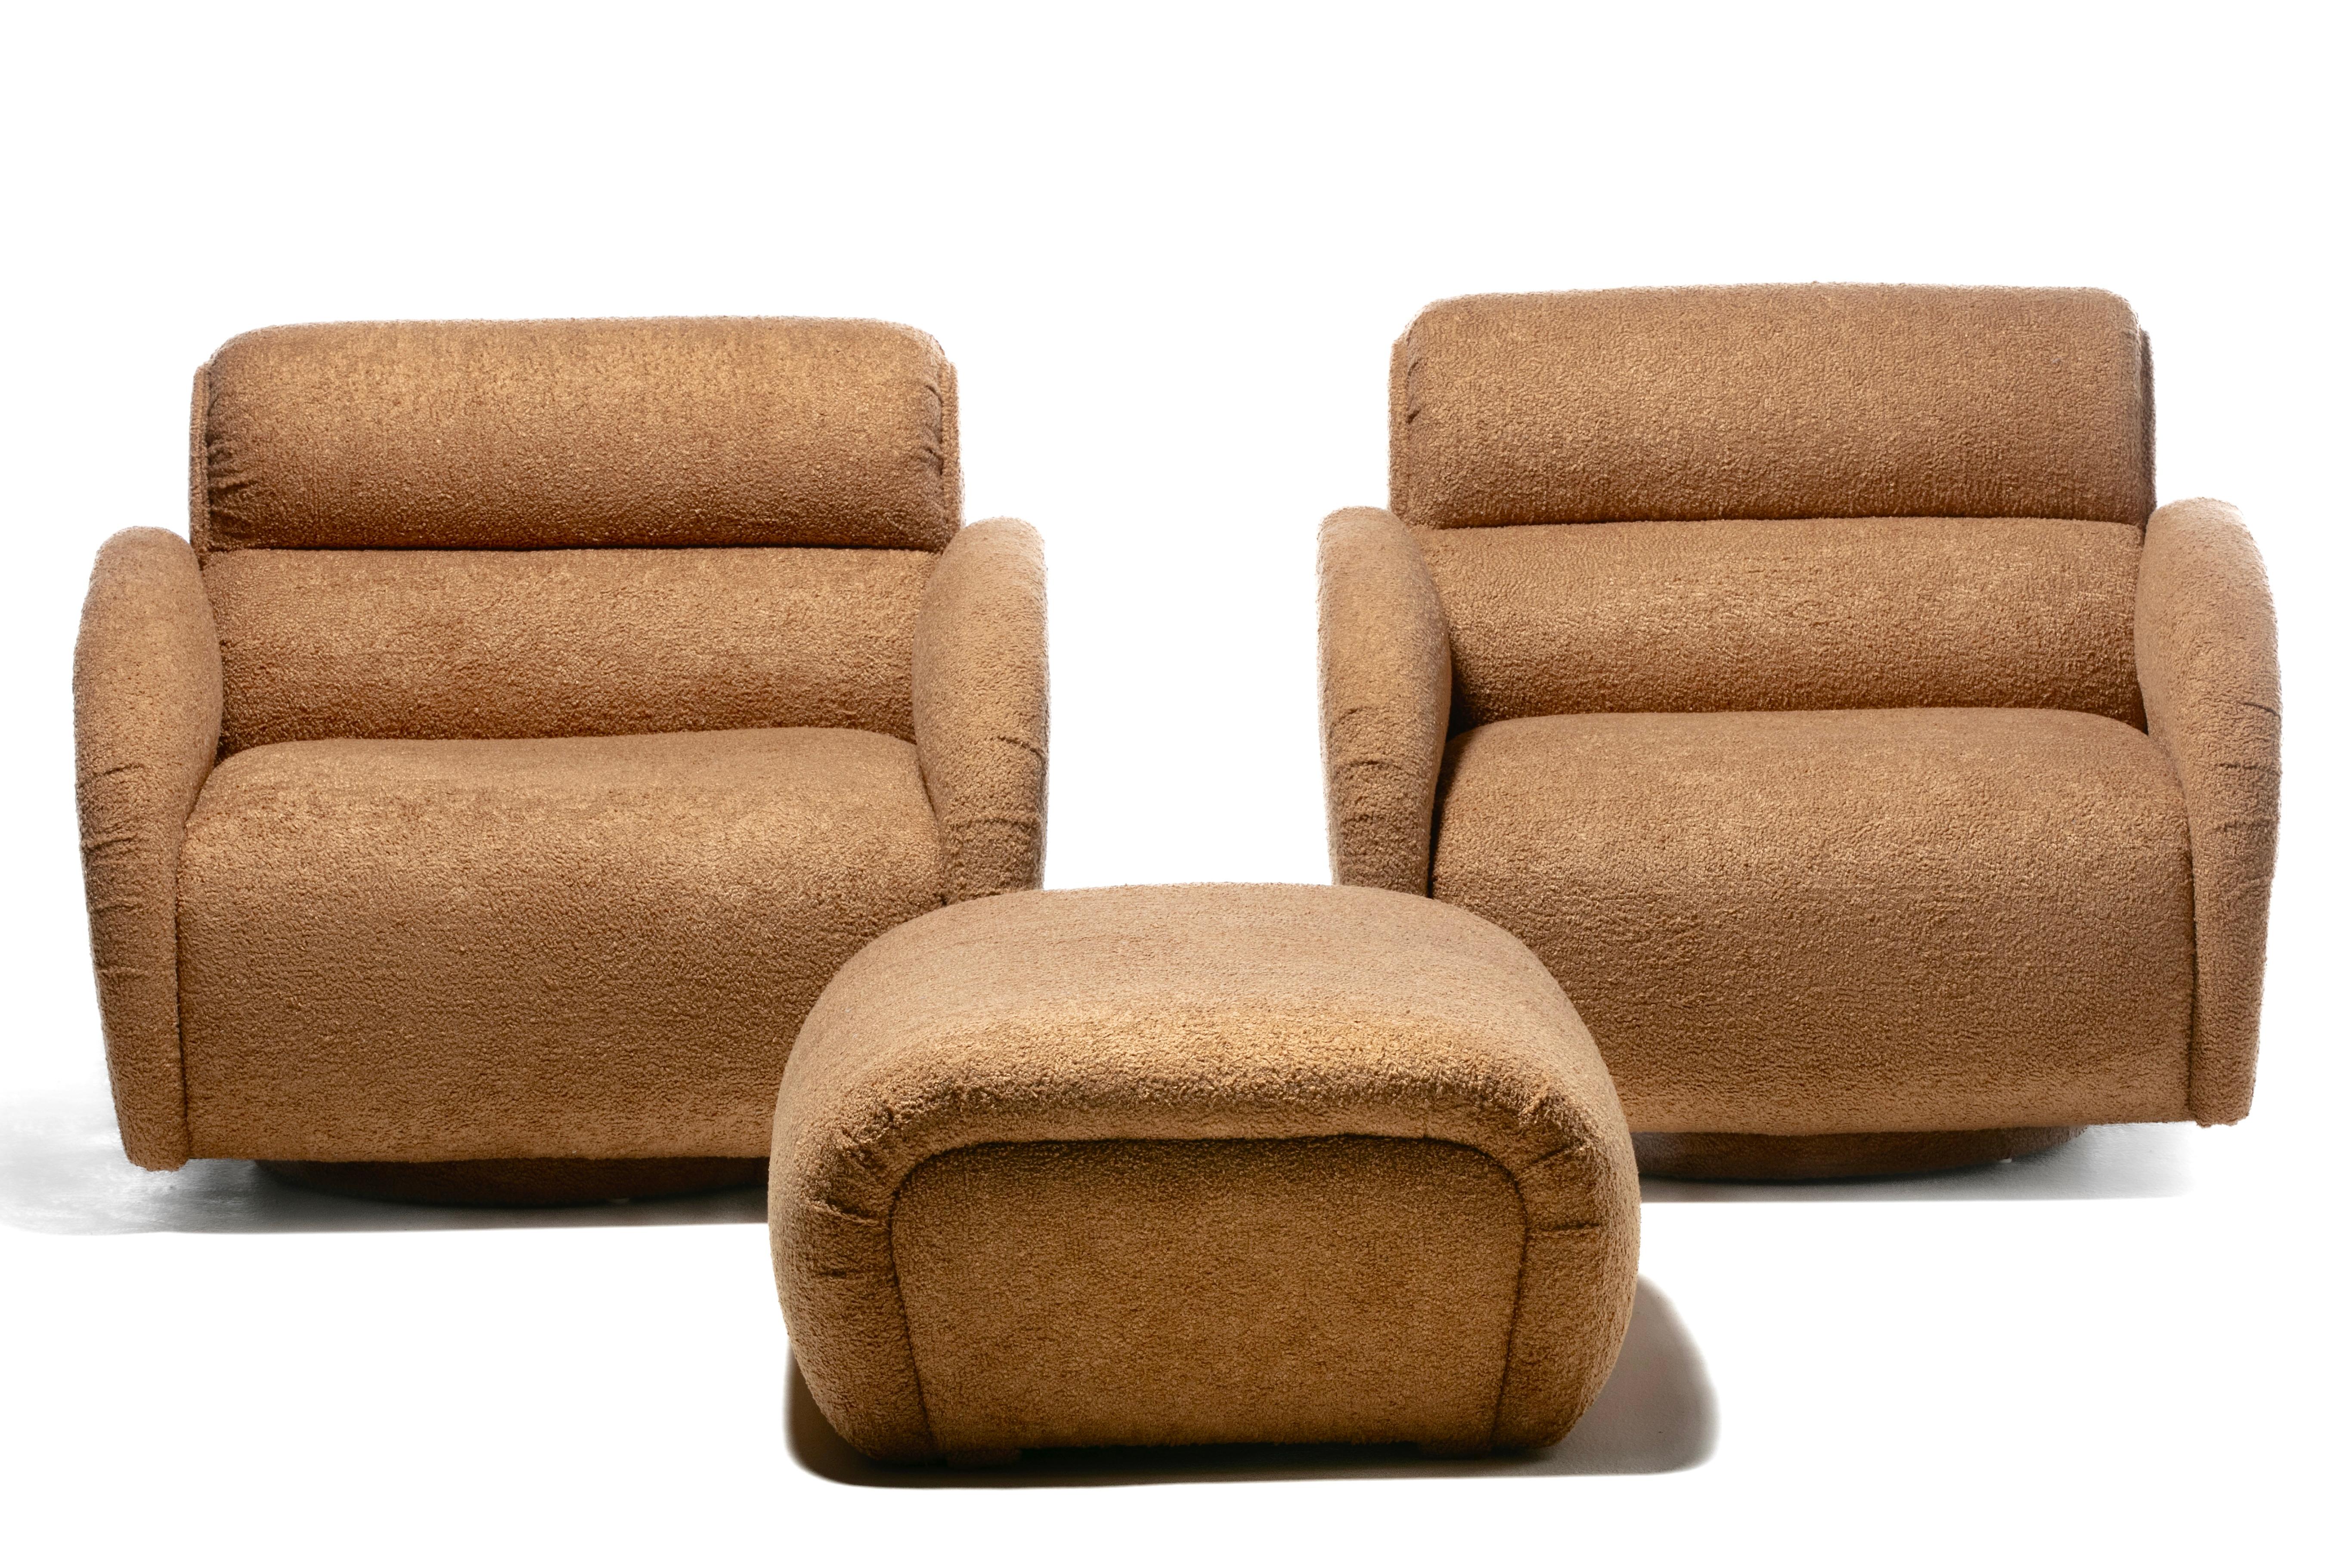 Large Scale Directional Post Modern Swivel Chairs & Ottoman in Mocha Fabric For Sale 13